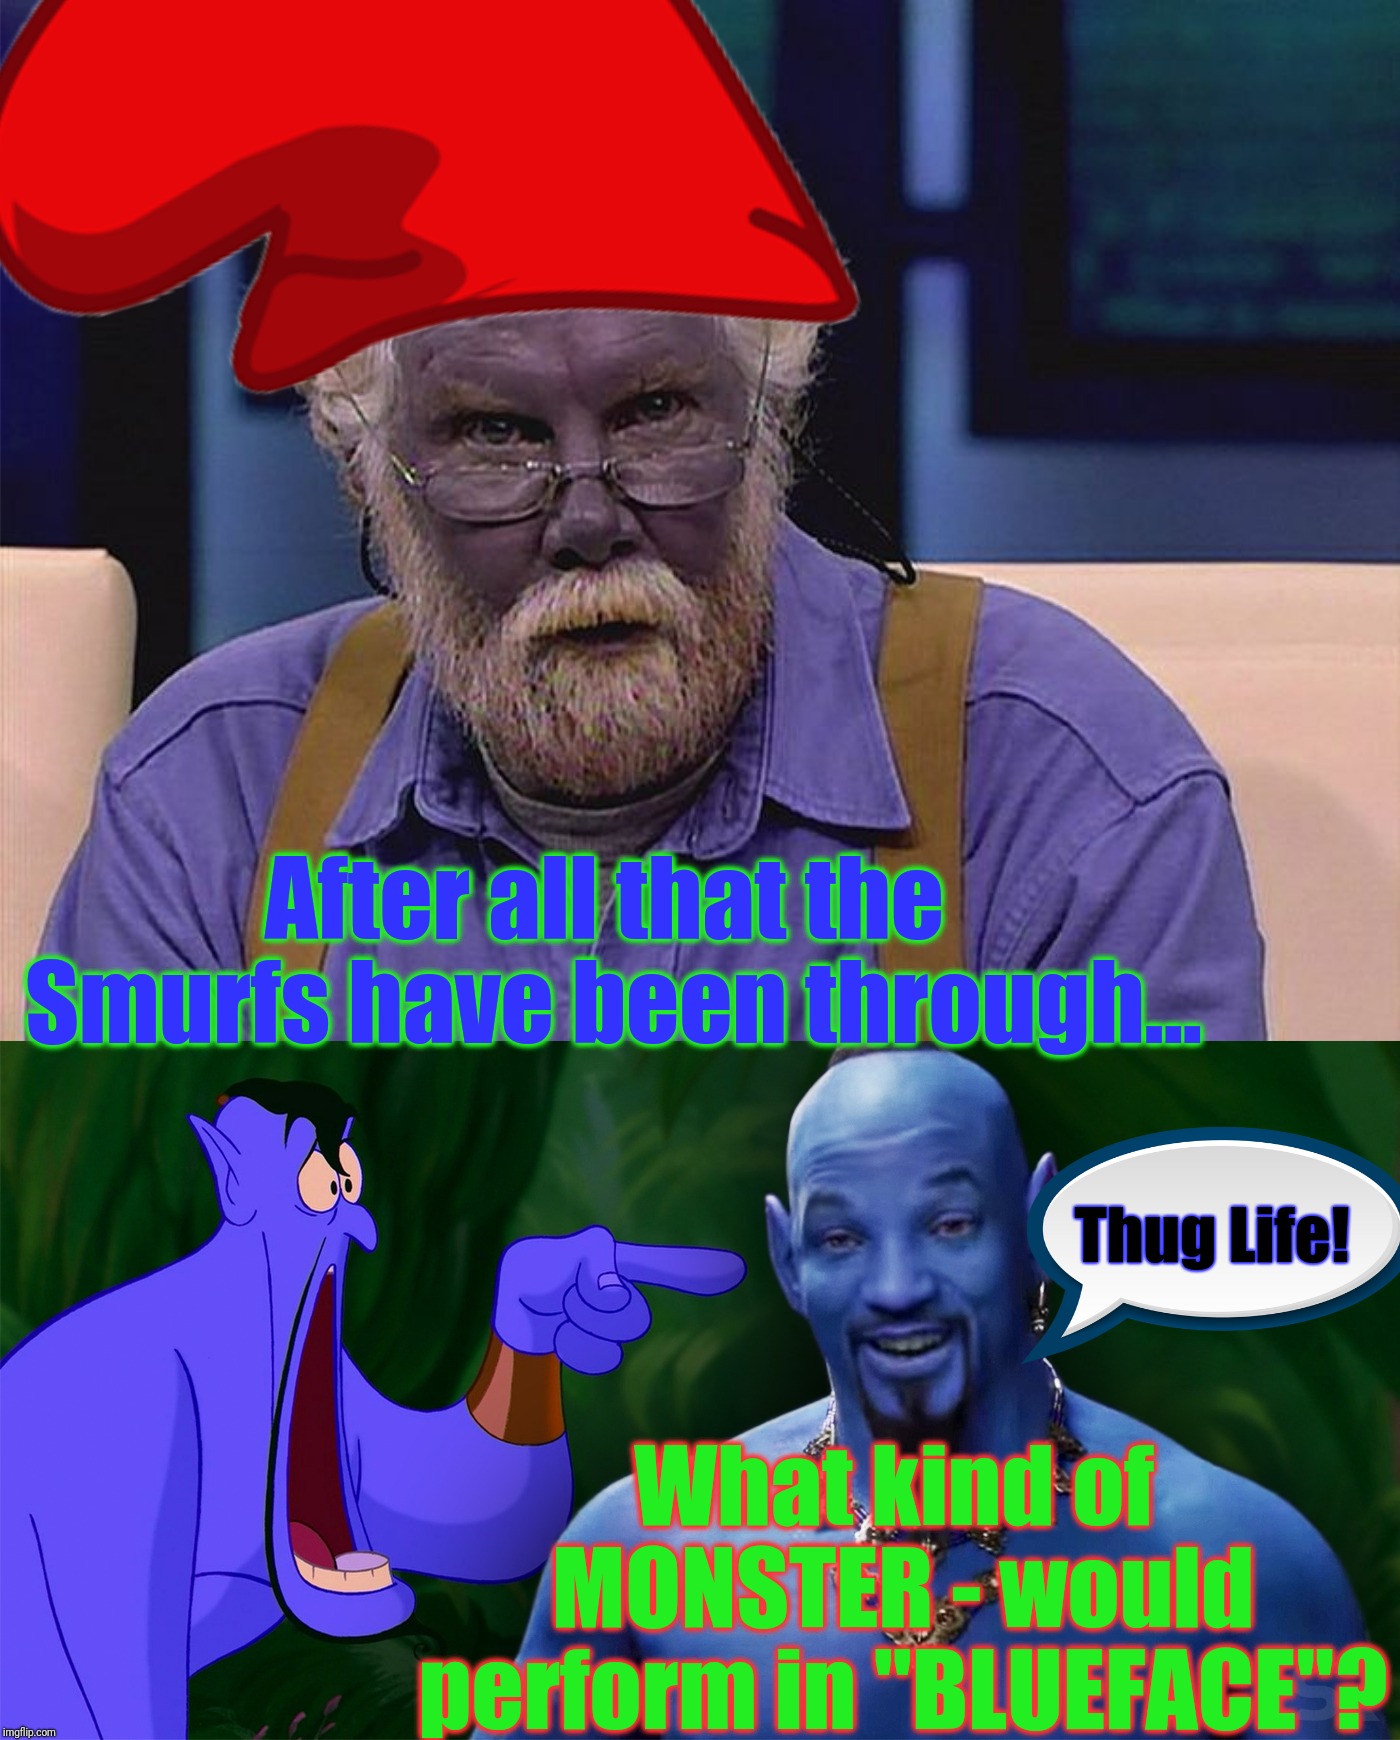 Hollywood's selective outrage and hypersensitivity aside - Smurfs are always passed-over, for the leading roles. |  After all that the Smurfs have been through... Thug Life! What kind of MONSTER - would perform in "BLUEFACE"? | image tagged in blue man,grouchy smurf,blue lives matter,memes,the struggle is real,where is the outrage | made w/ Imgflip meme maker